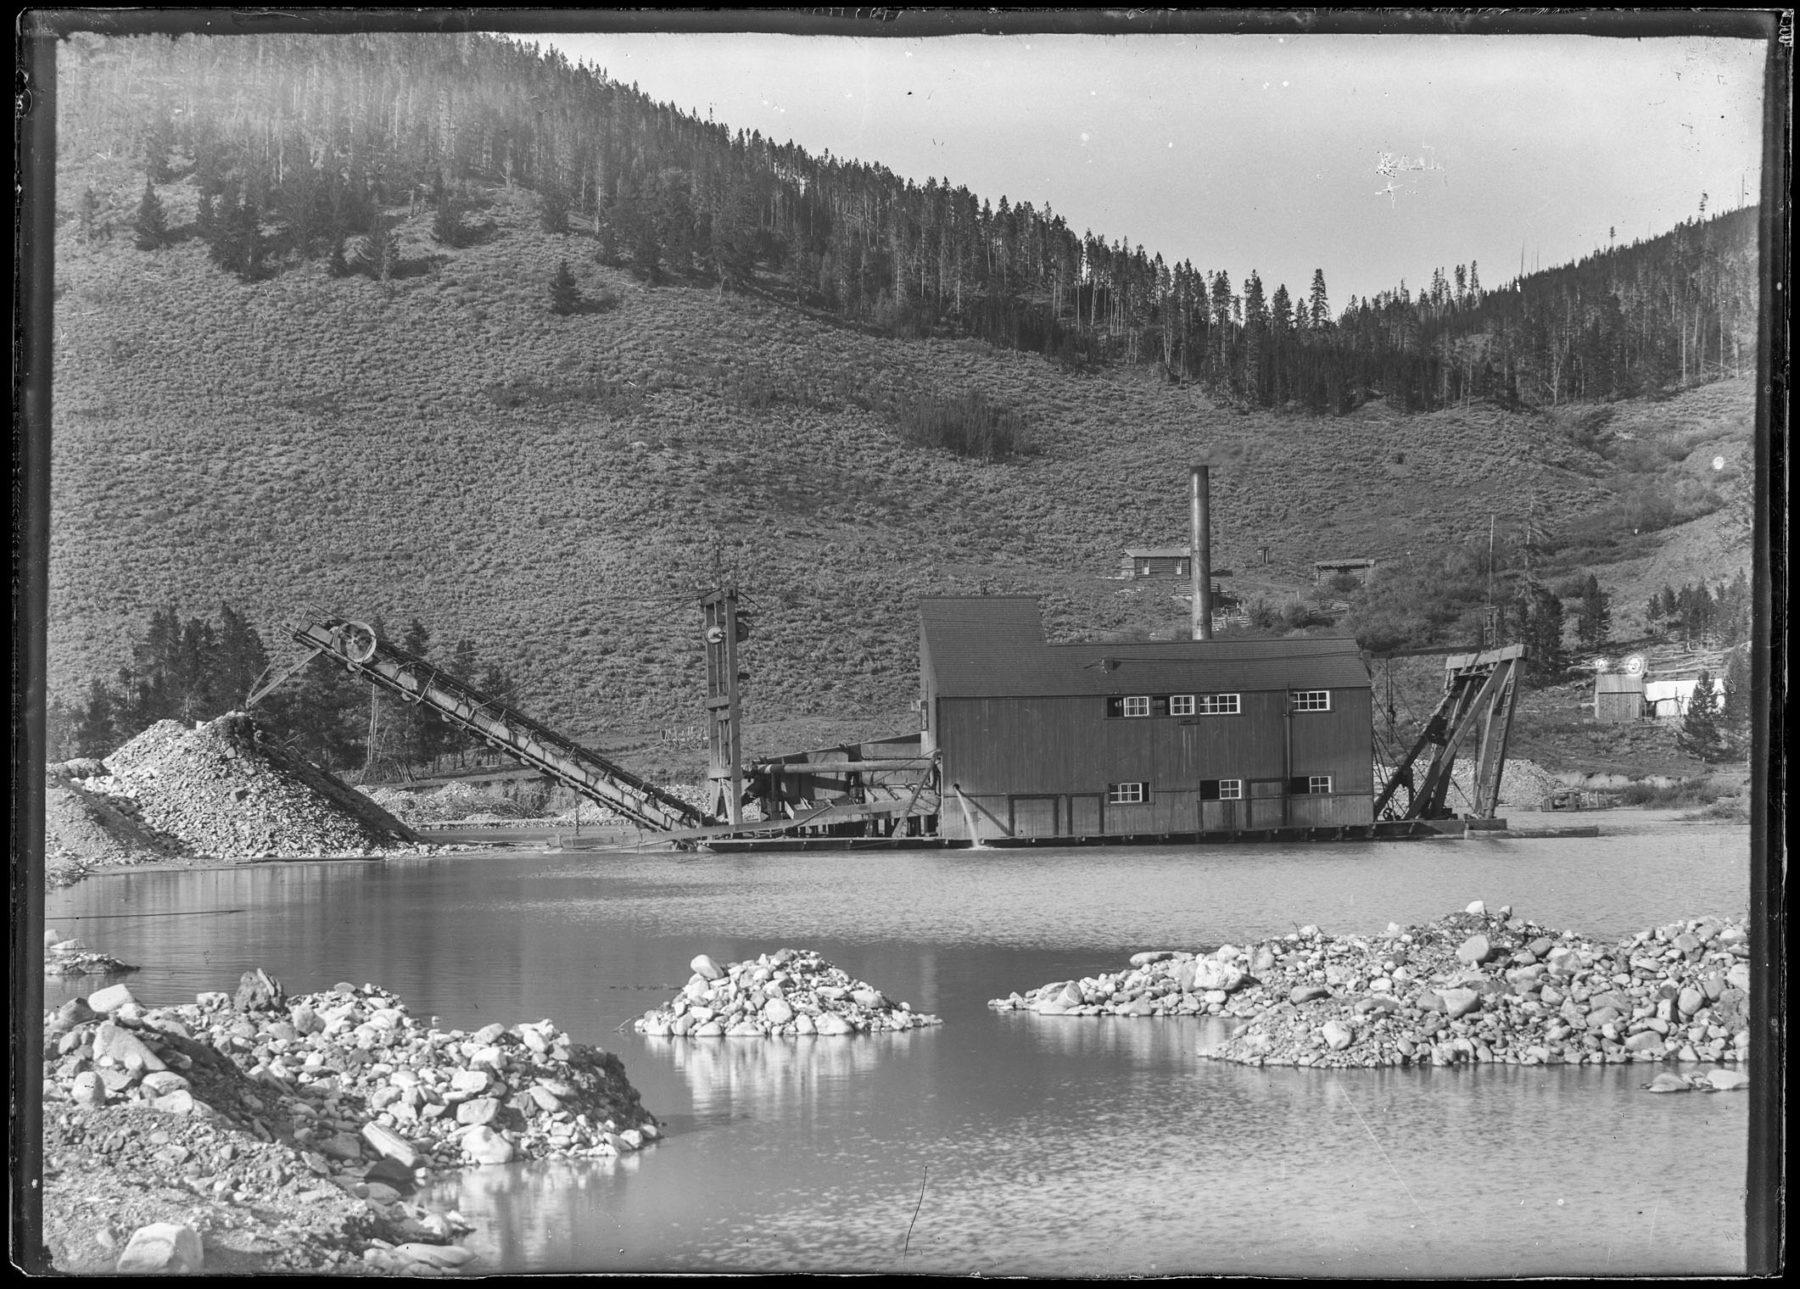 Breckenridge and southern Summit County experienced three mining booms.  The first, lasting from 1859 until the mid-1860s, brought prospectors who looked for the “easy” gold--the nuggets in streams, the pieces laying on the ground and buried in shallow soils on the hillsides.  They used pans, rocker boxes, long toms, and later high pressure hoses called “giants” to wash the gold-filled soil into sluice boxes.  The second boom, the hard rock mining boom, began in the 1870s.  Rather than the individual prospector chasing his dream, companies hired miners and others to work the mines.